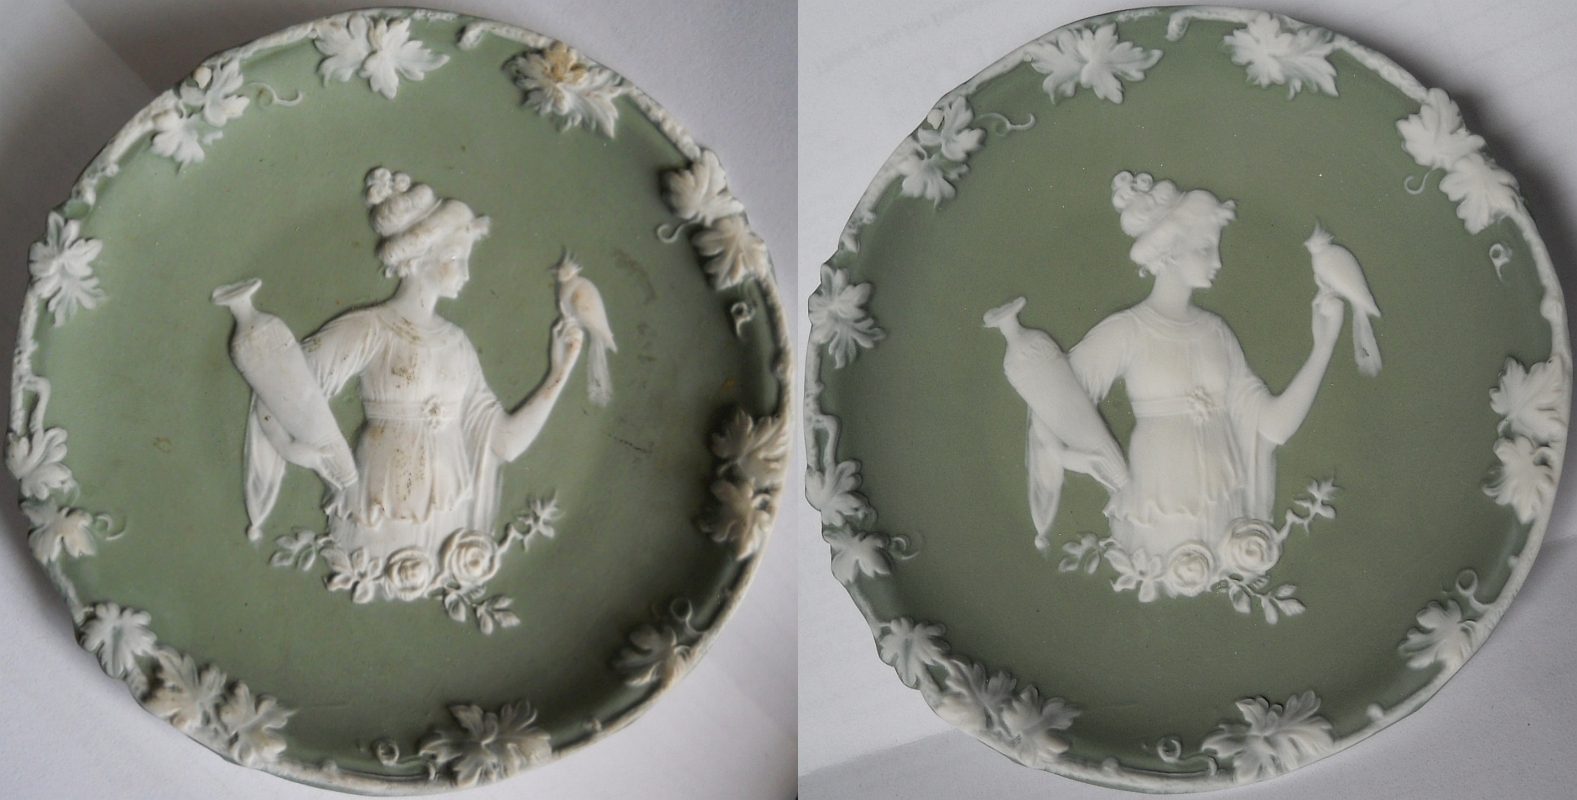 001-JasperWare-Mini-Plate-Plaque-Before-and-After-Clean.jpg